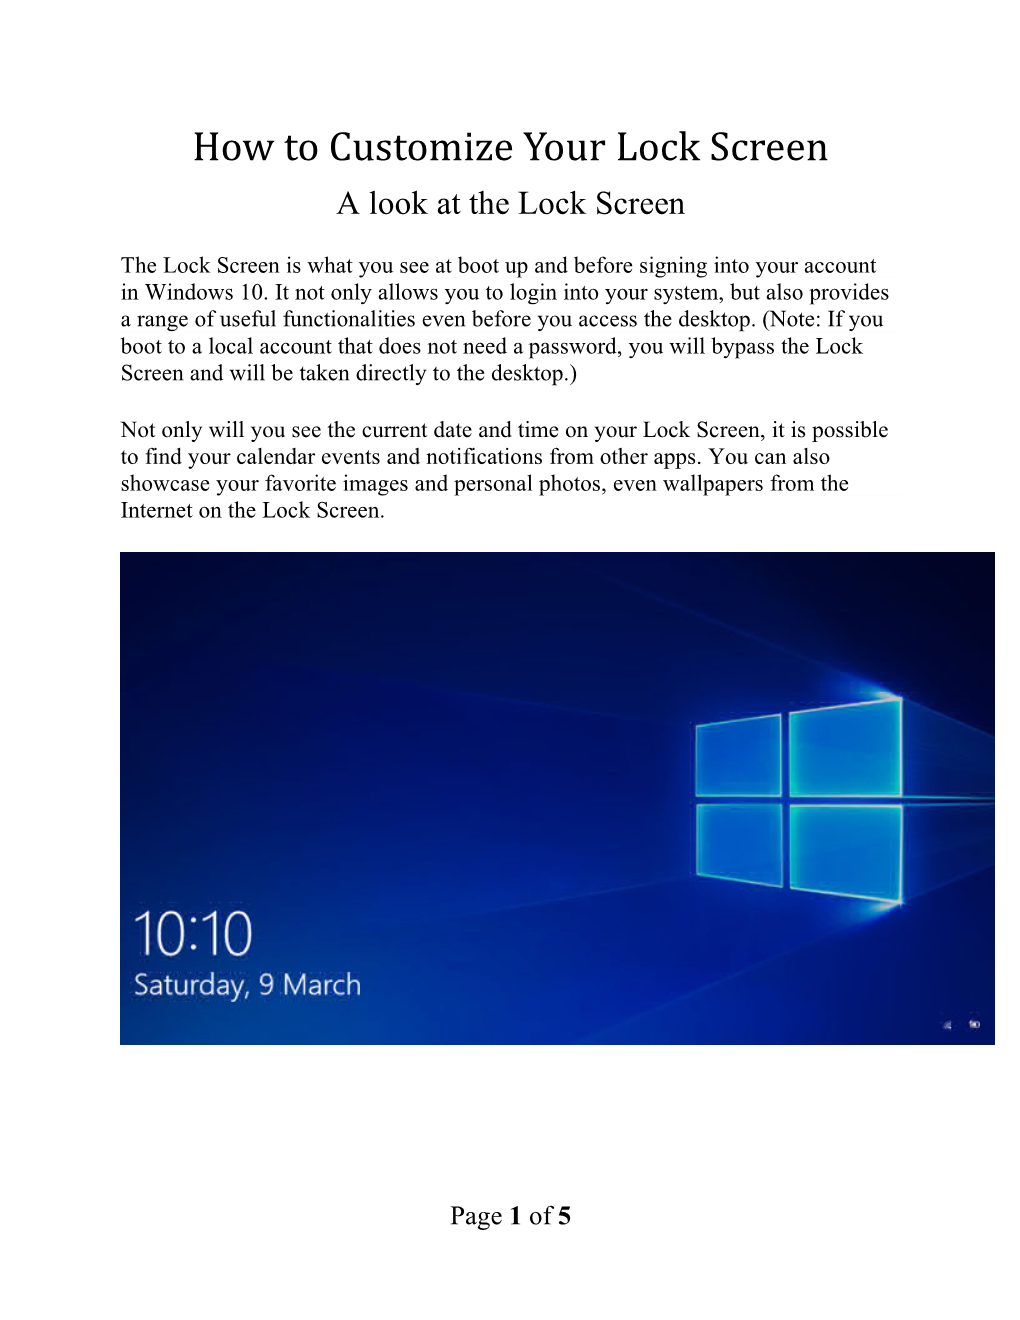 How to Customize Your Lock Screen.Pdf